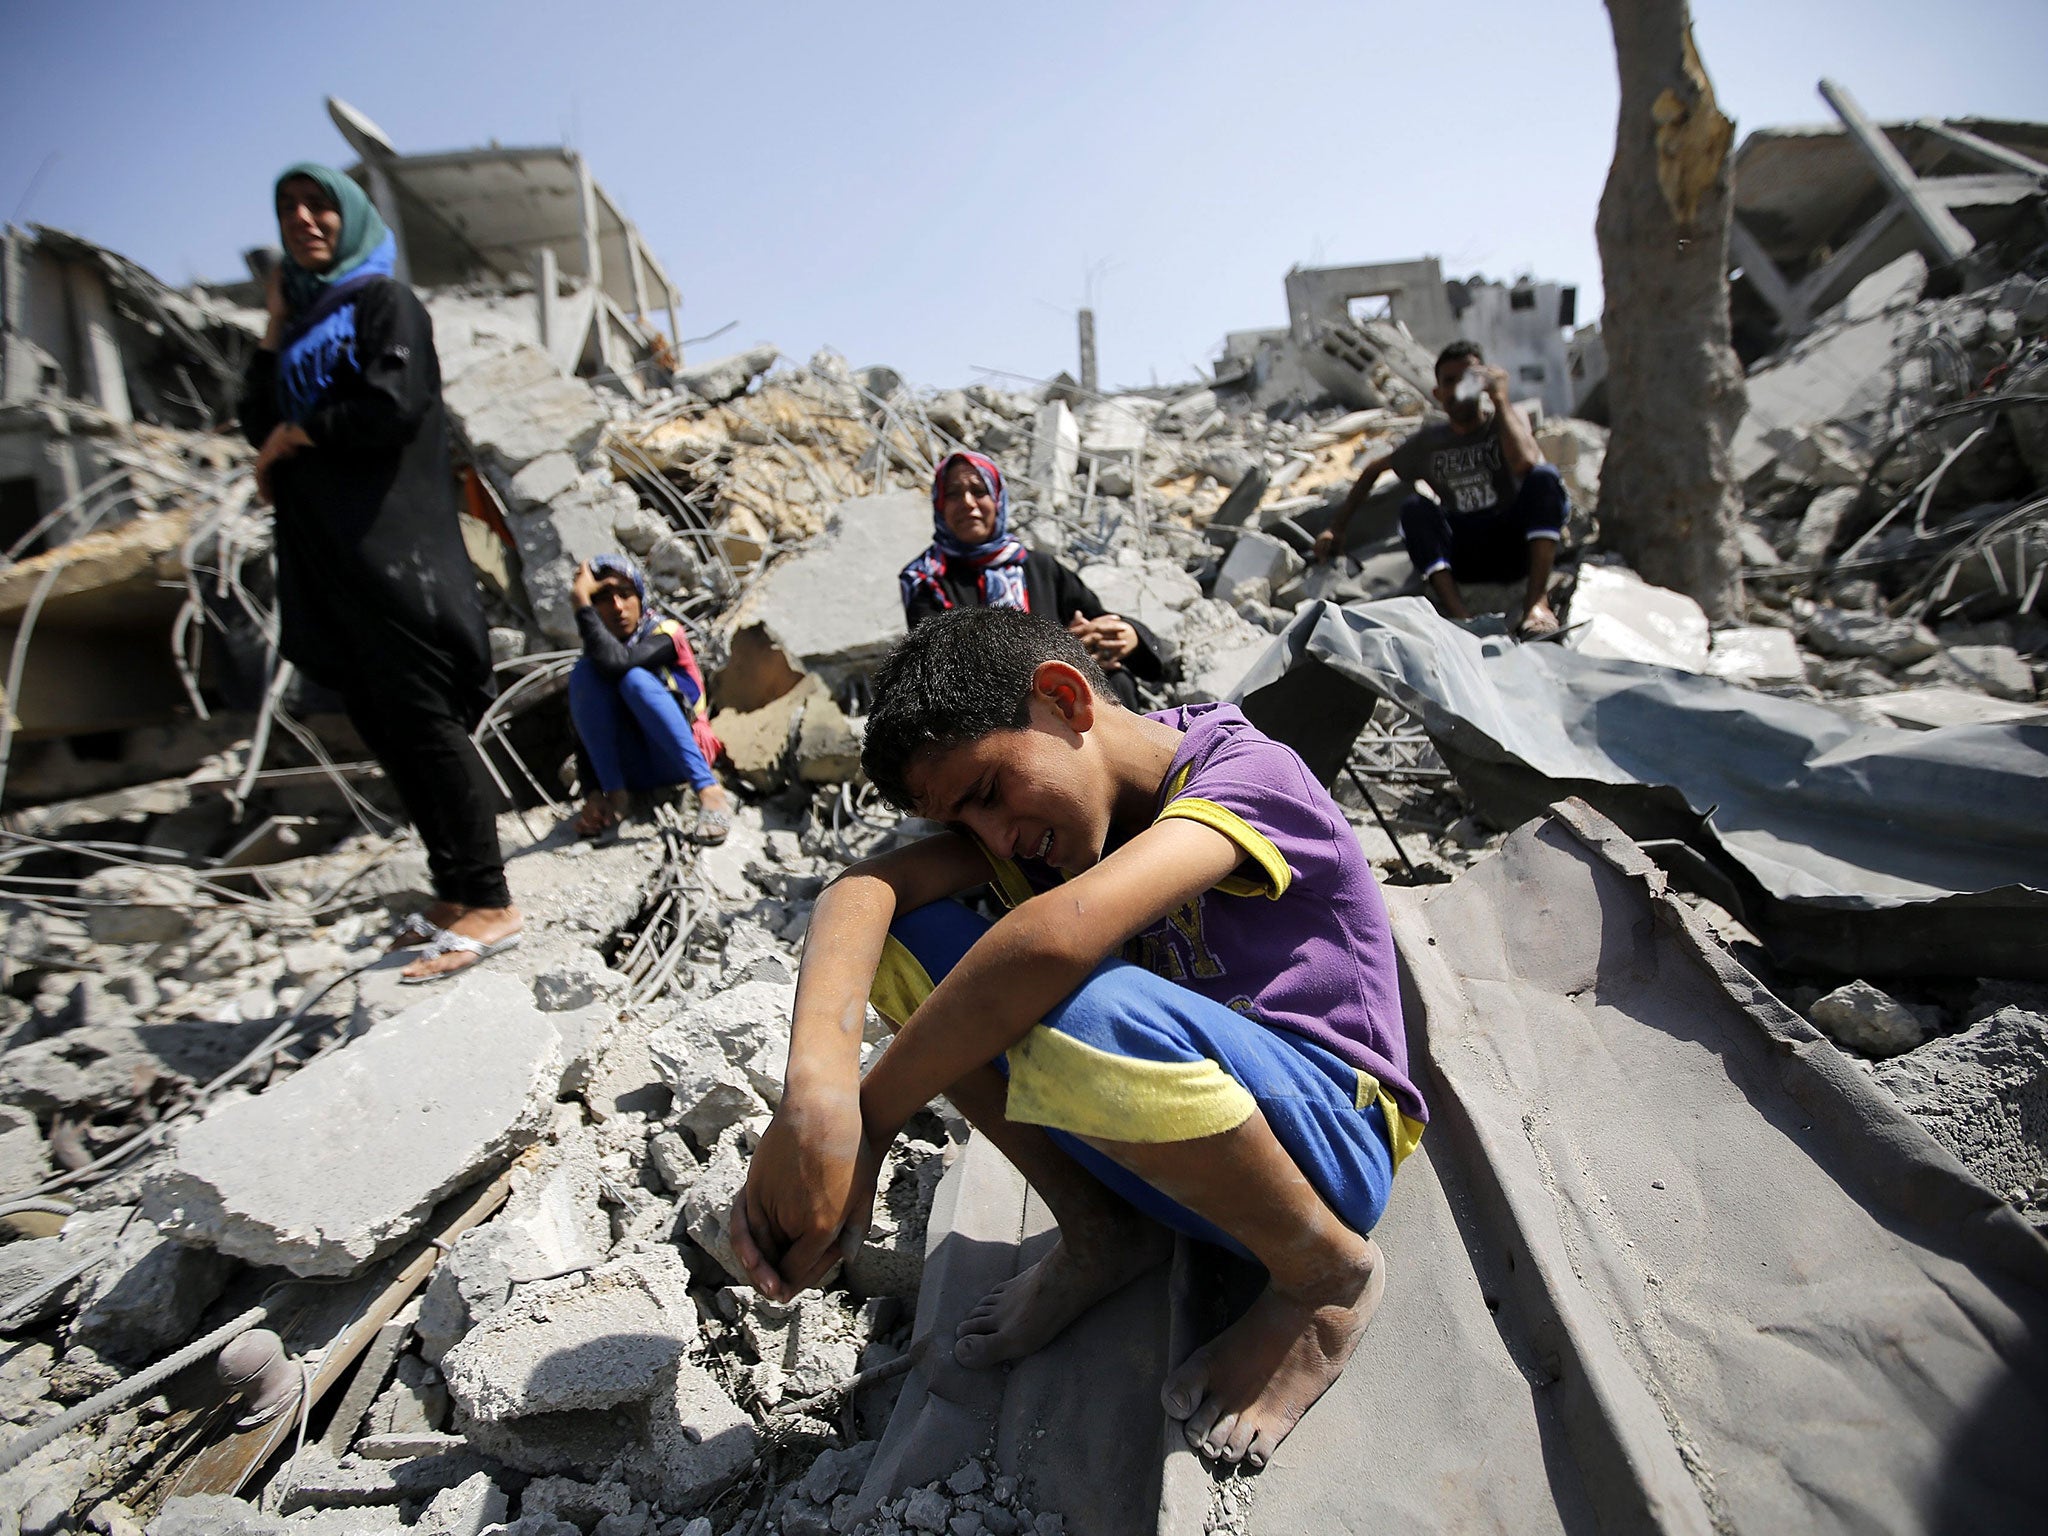 Ahmad Al Kafarna, aged 7, cries on the remains of his home in Beit Hanun, the northern Gaza Strip, yesterday